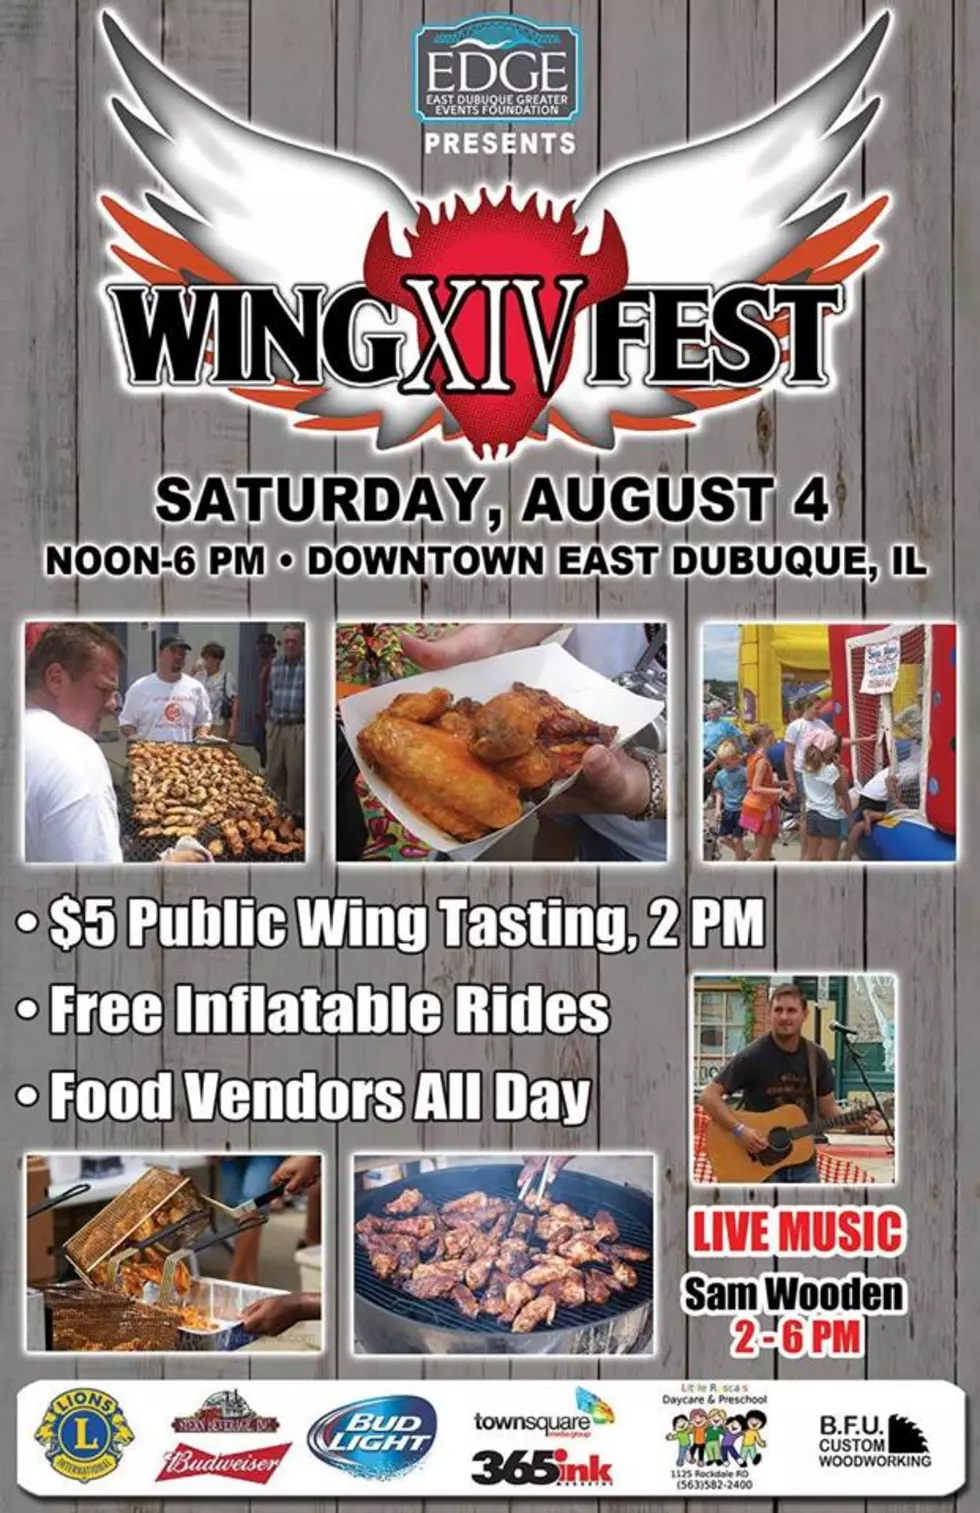 Wingfest XIV in East Dubuque